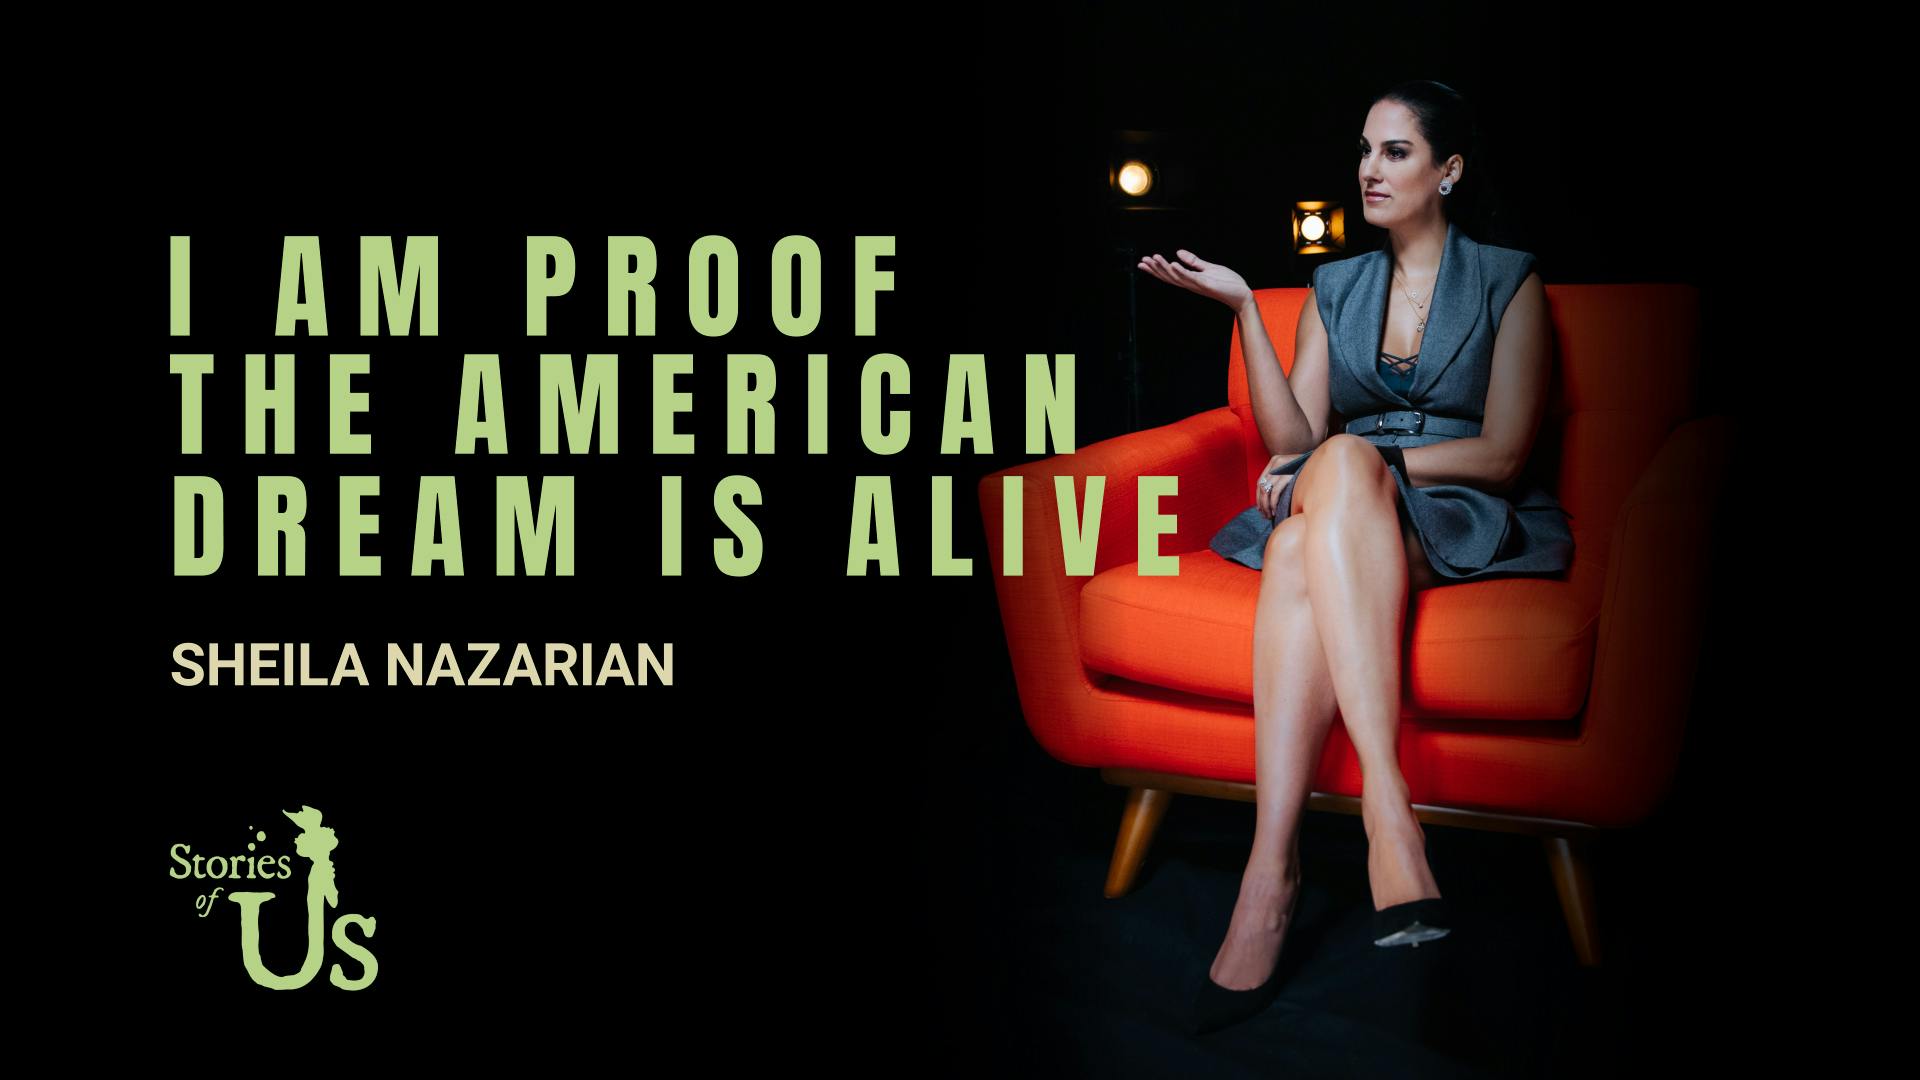 Sheila Nazarian: I Am Proof the American Dream Is Alive